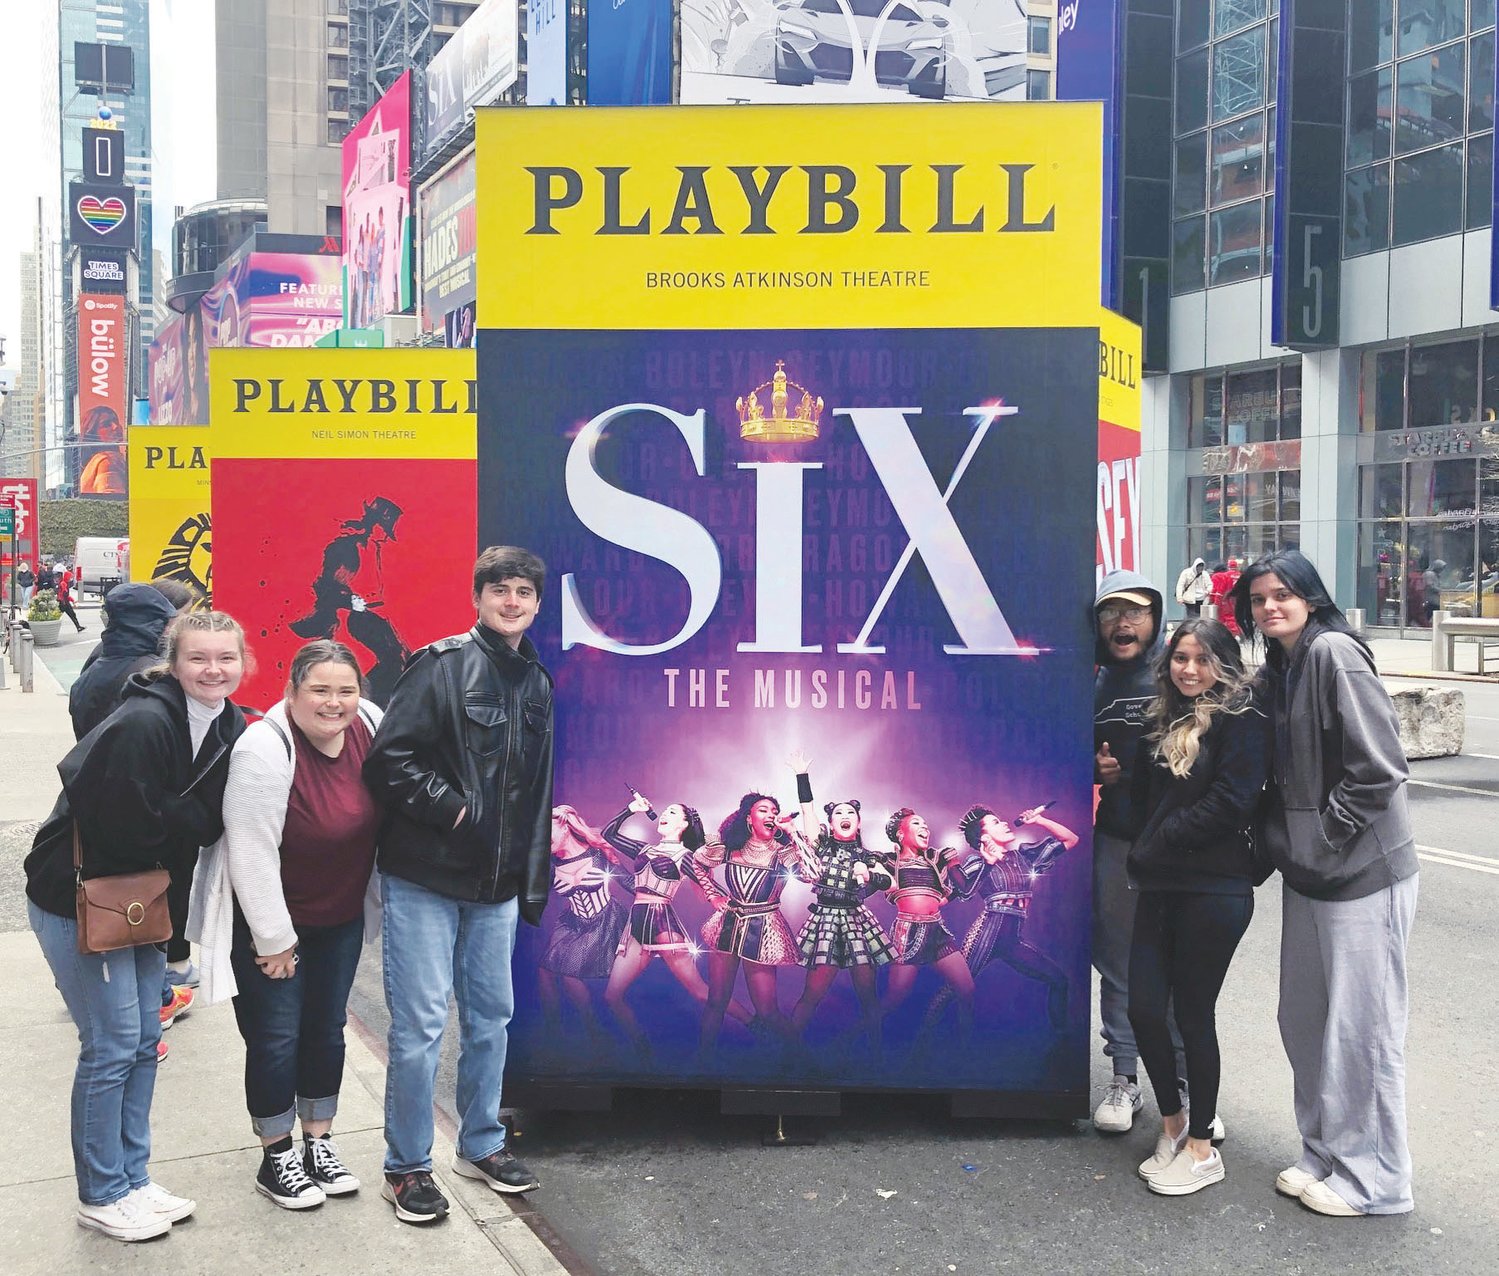 J-M students find the giant 'Six' Playbill at a special Times Square exhibit a few days before seeing the musical.